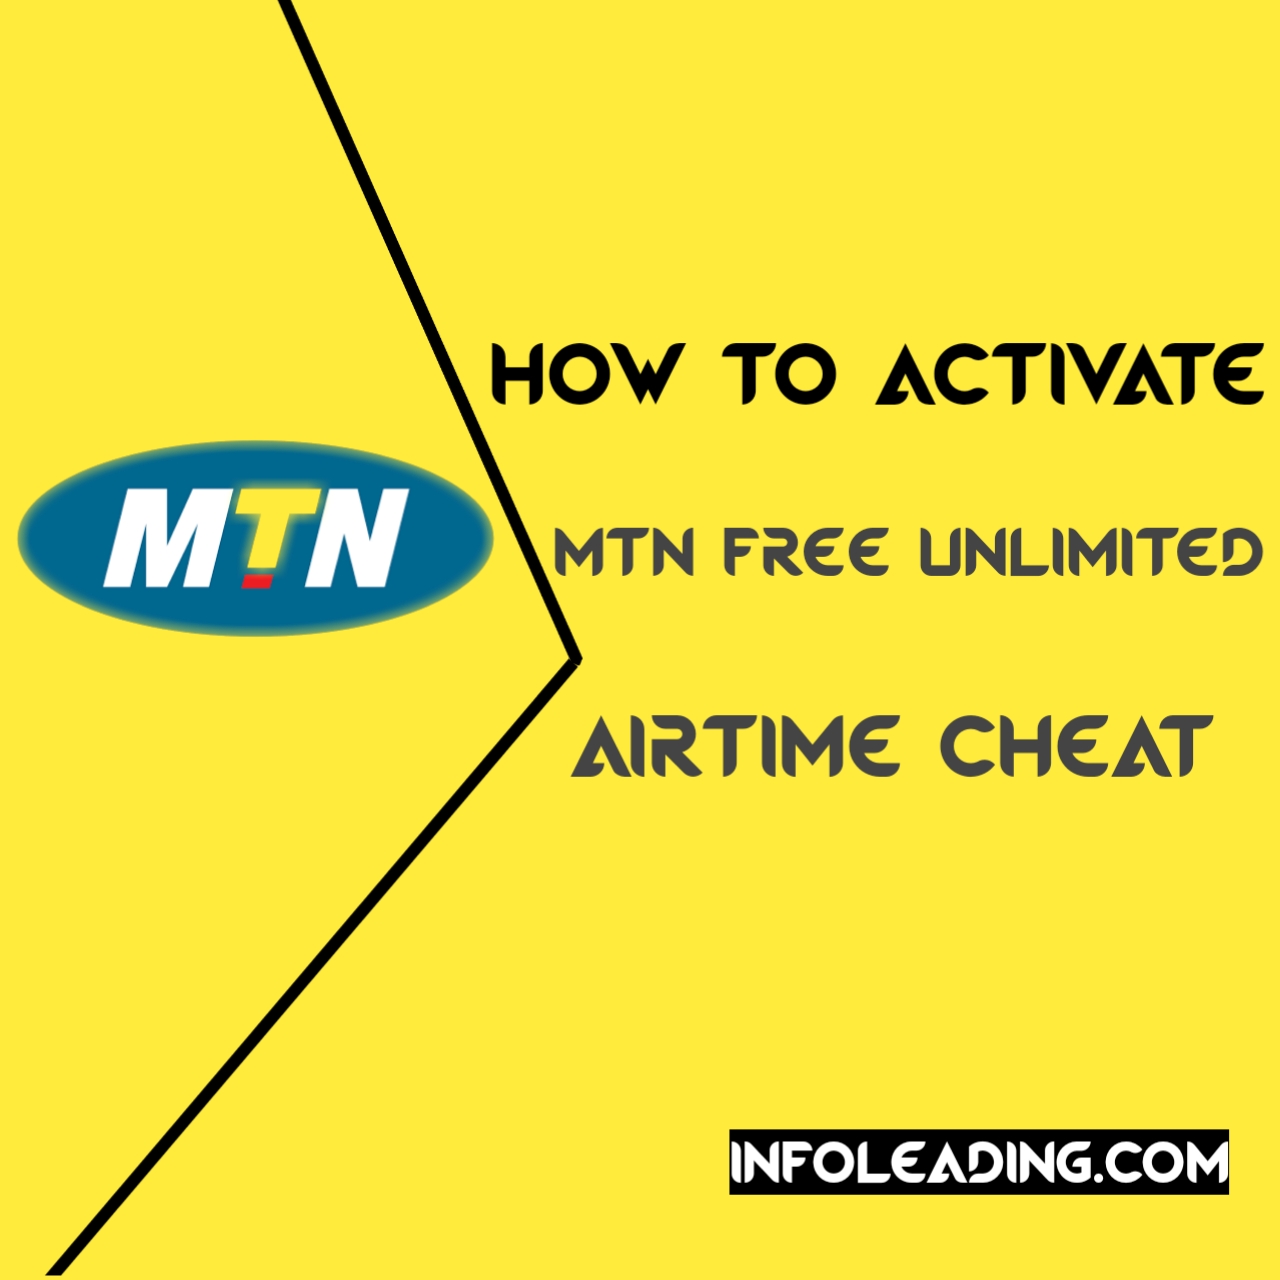 How To Activate MTN Free Unlimited Airtime Cheat InfoLeading